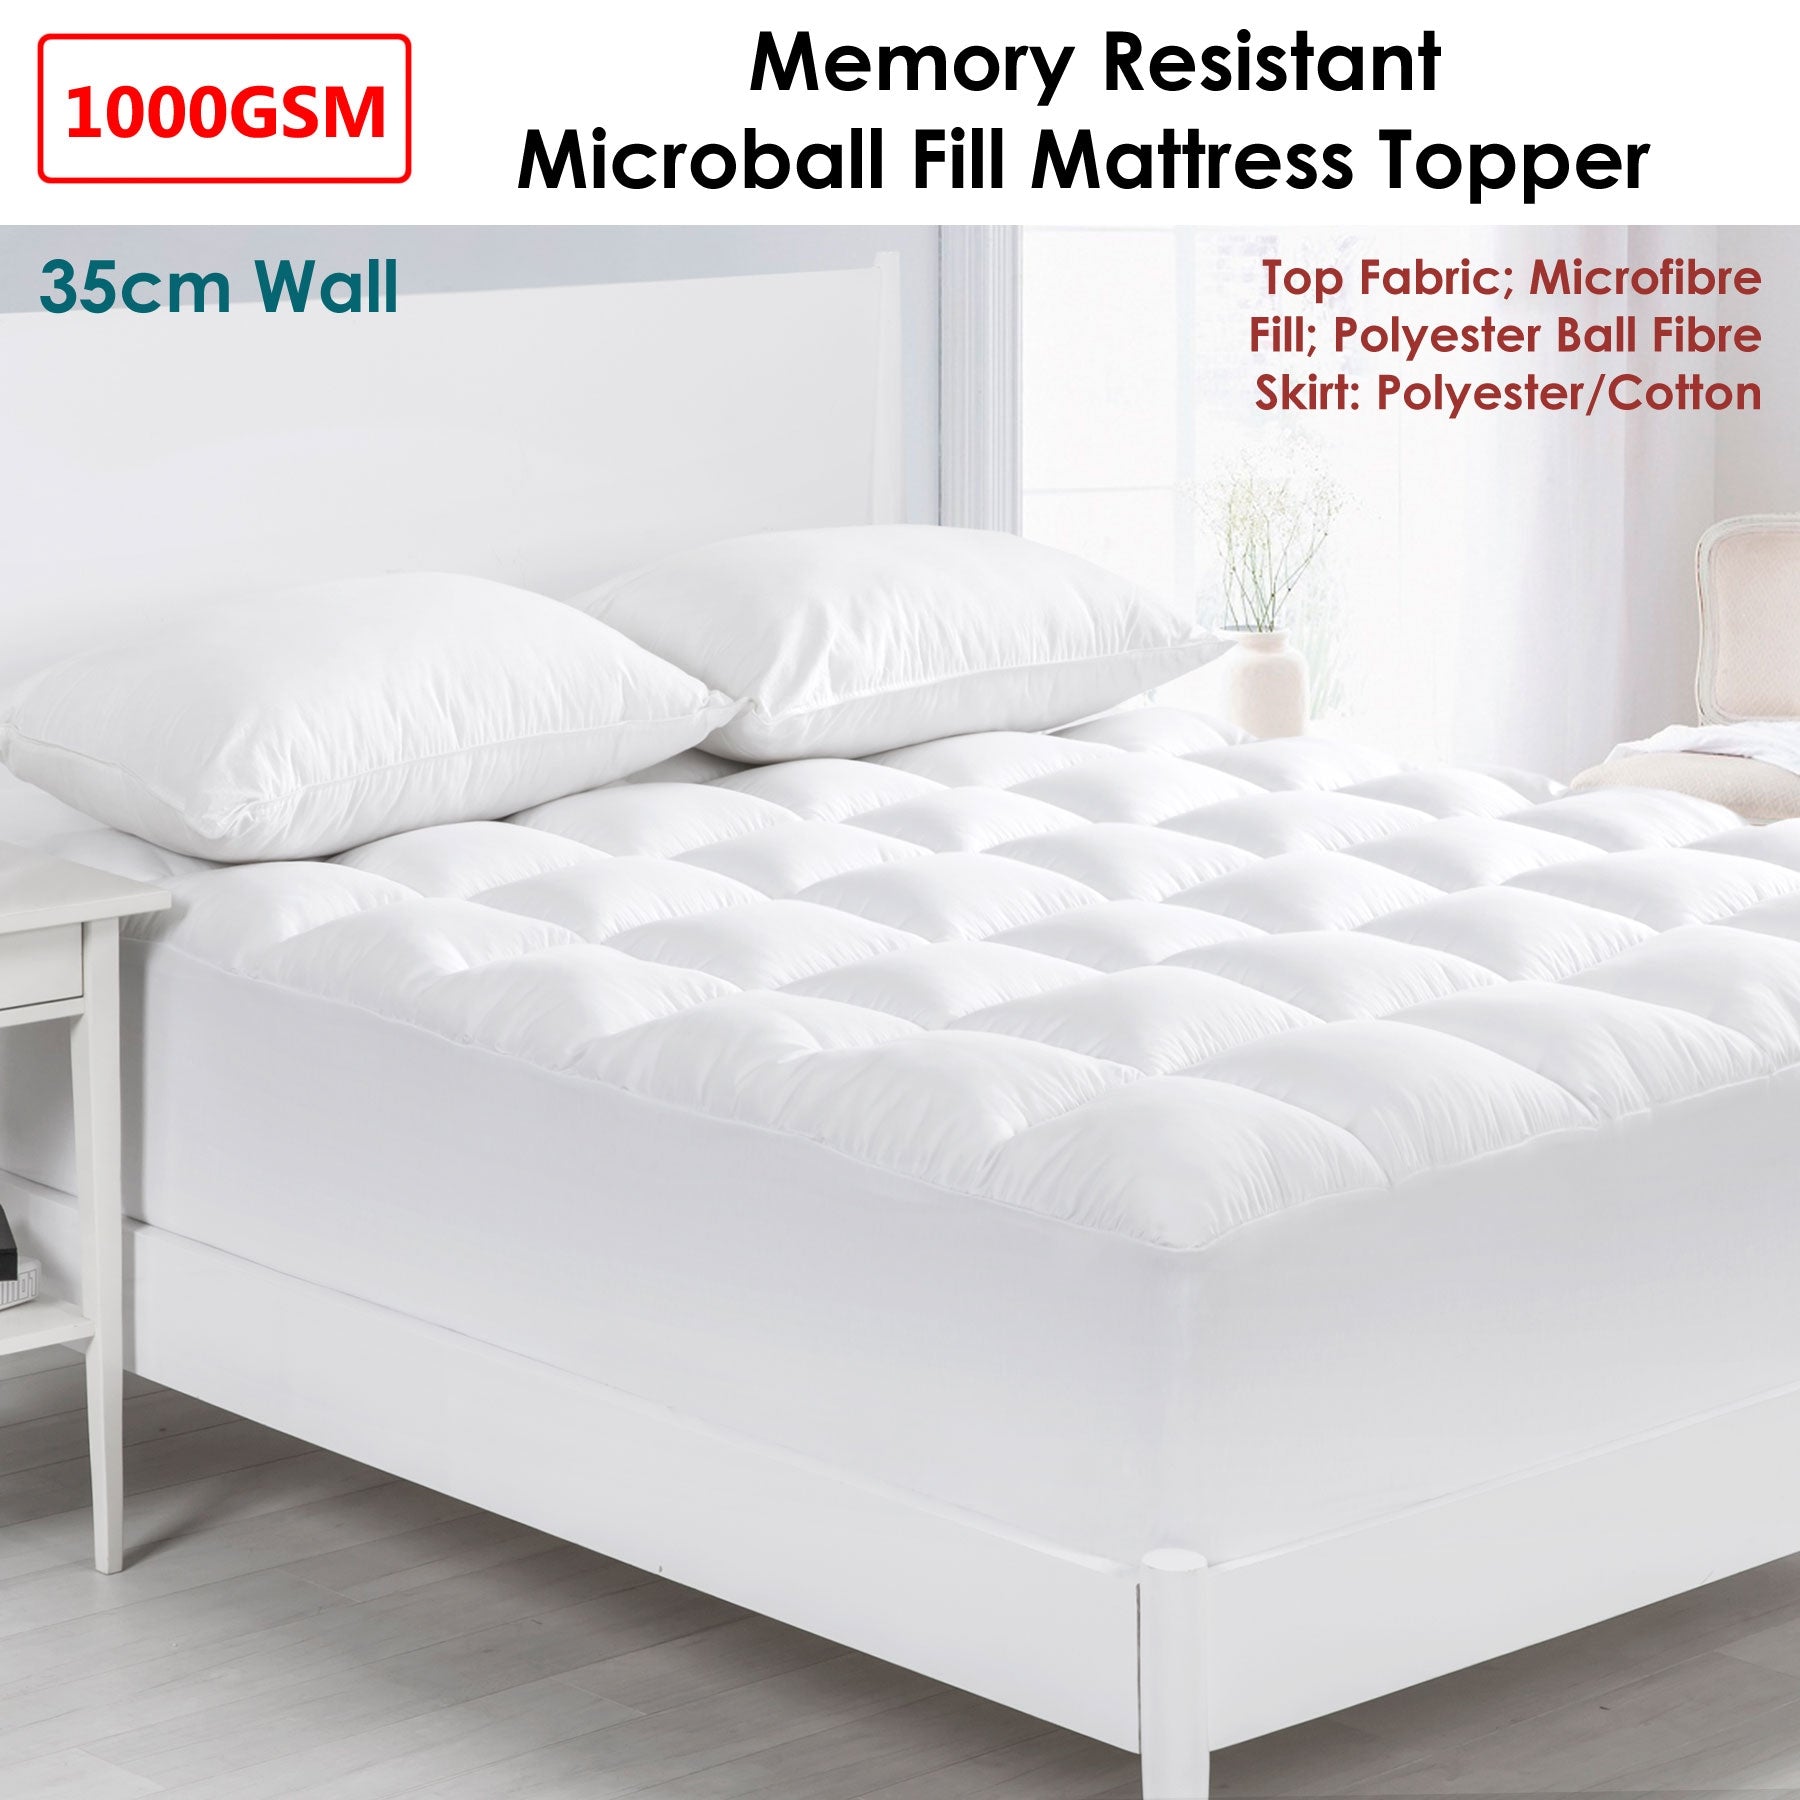 Cloudland 1000GSM Memory Resistant Microball Fill Mattress Topper King